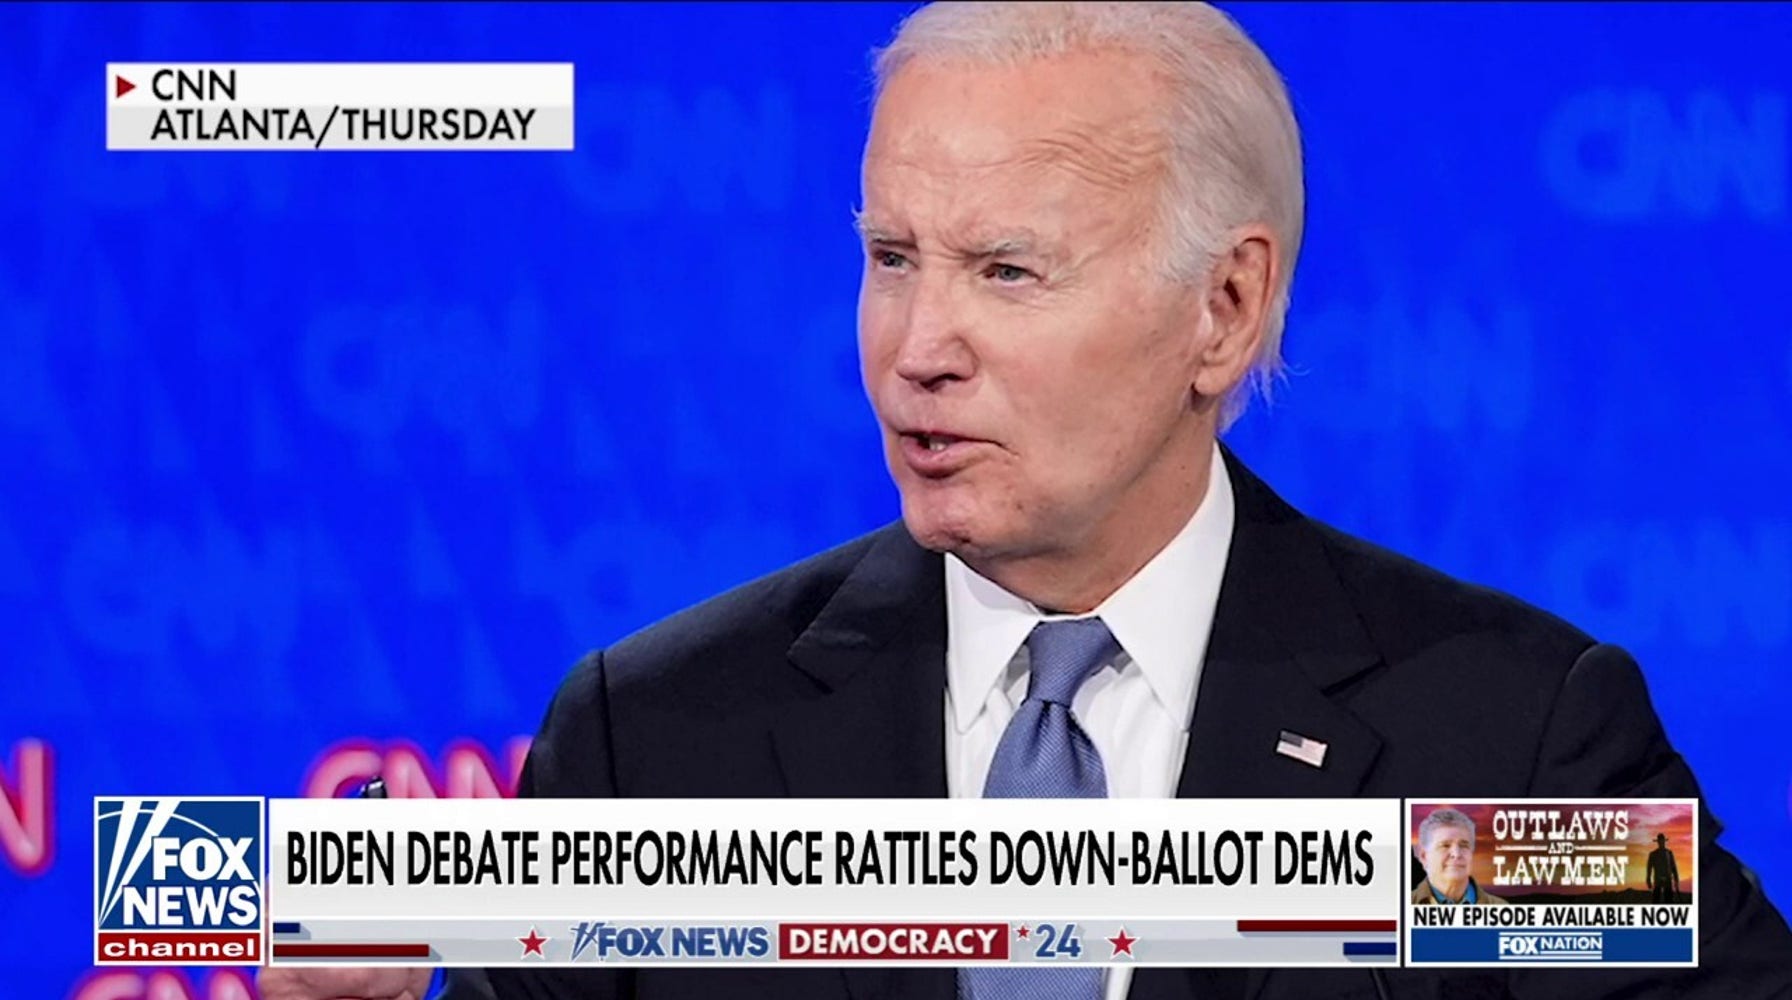 Concerns Mount Over Biden's Debate Performance, Prompting Private Discussion Within Democratic Party